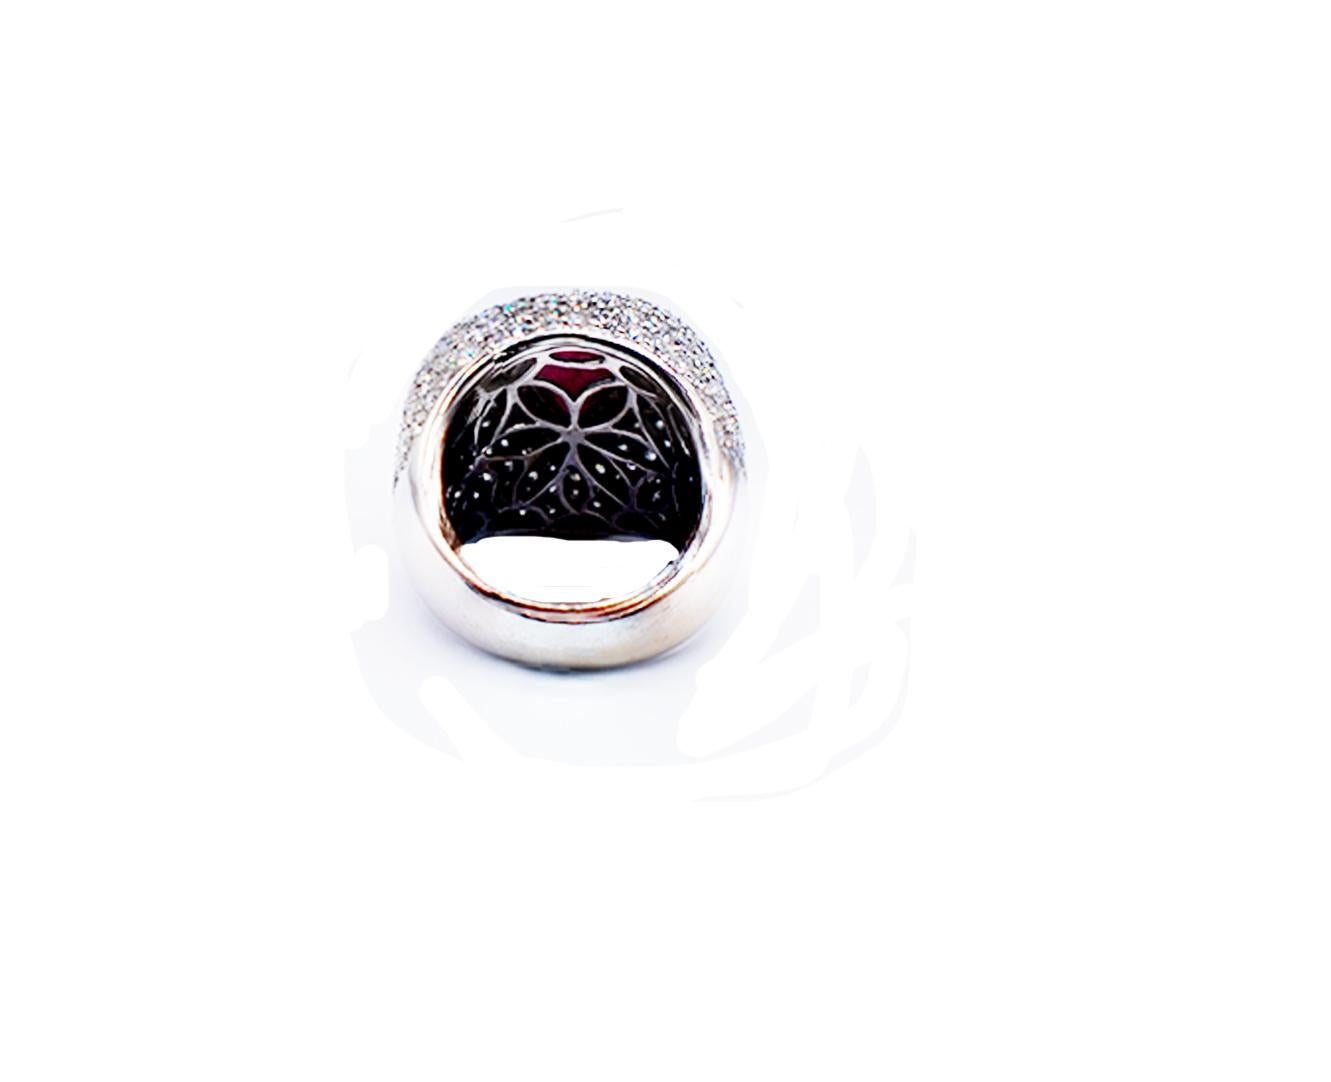 Cabochon 3.71 Carat Ruby and 8 Carat Diamond Dome Ring 18 Karat White Gold For Sale